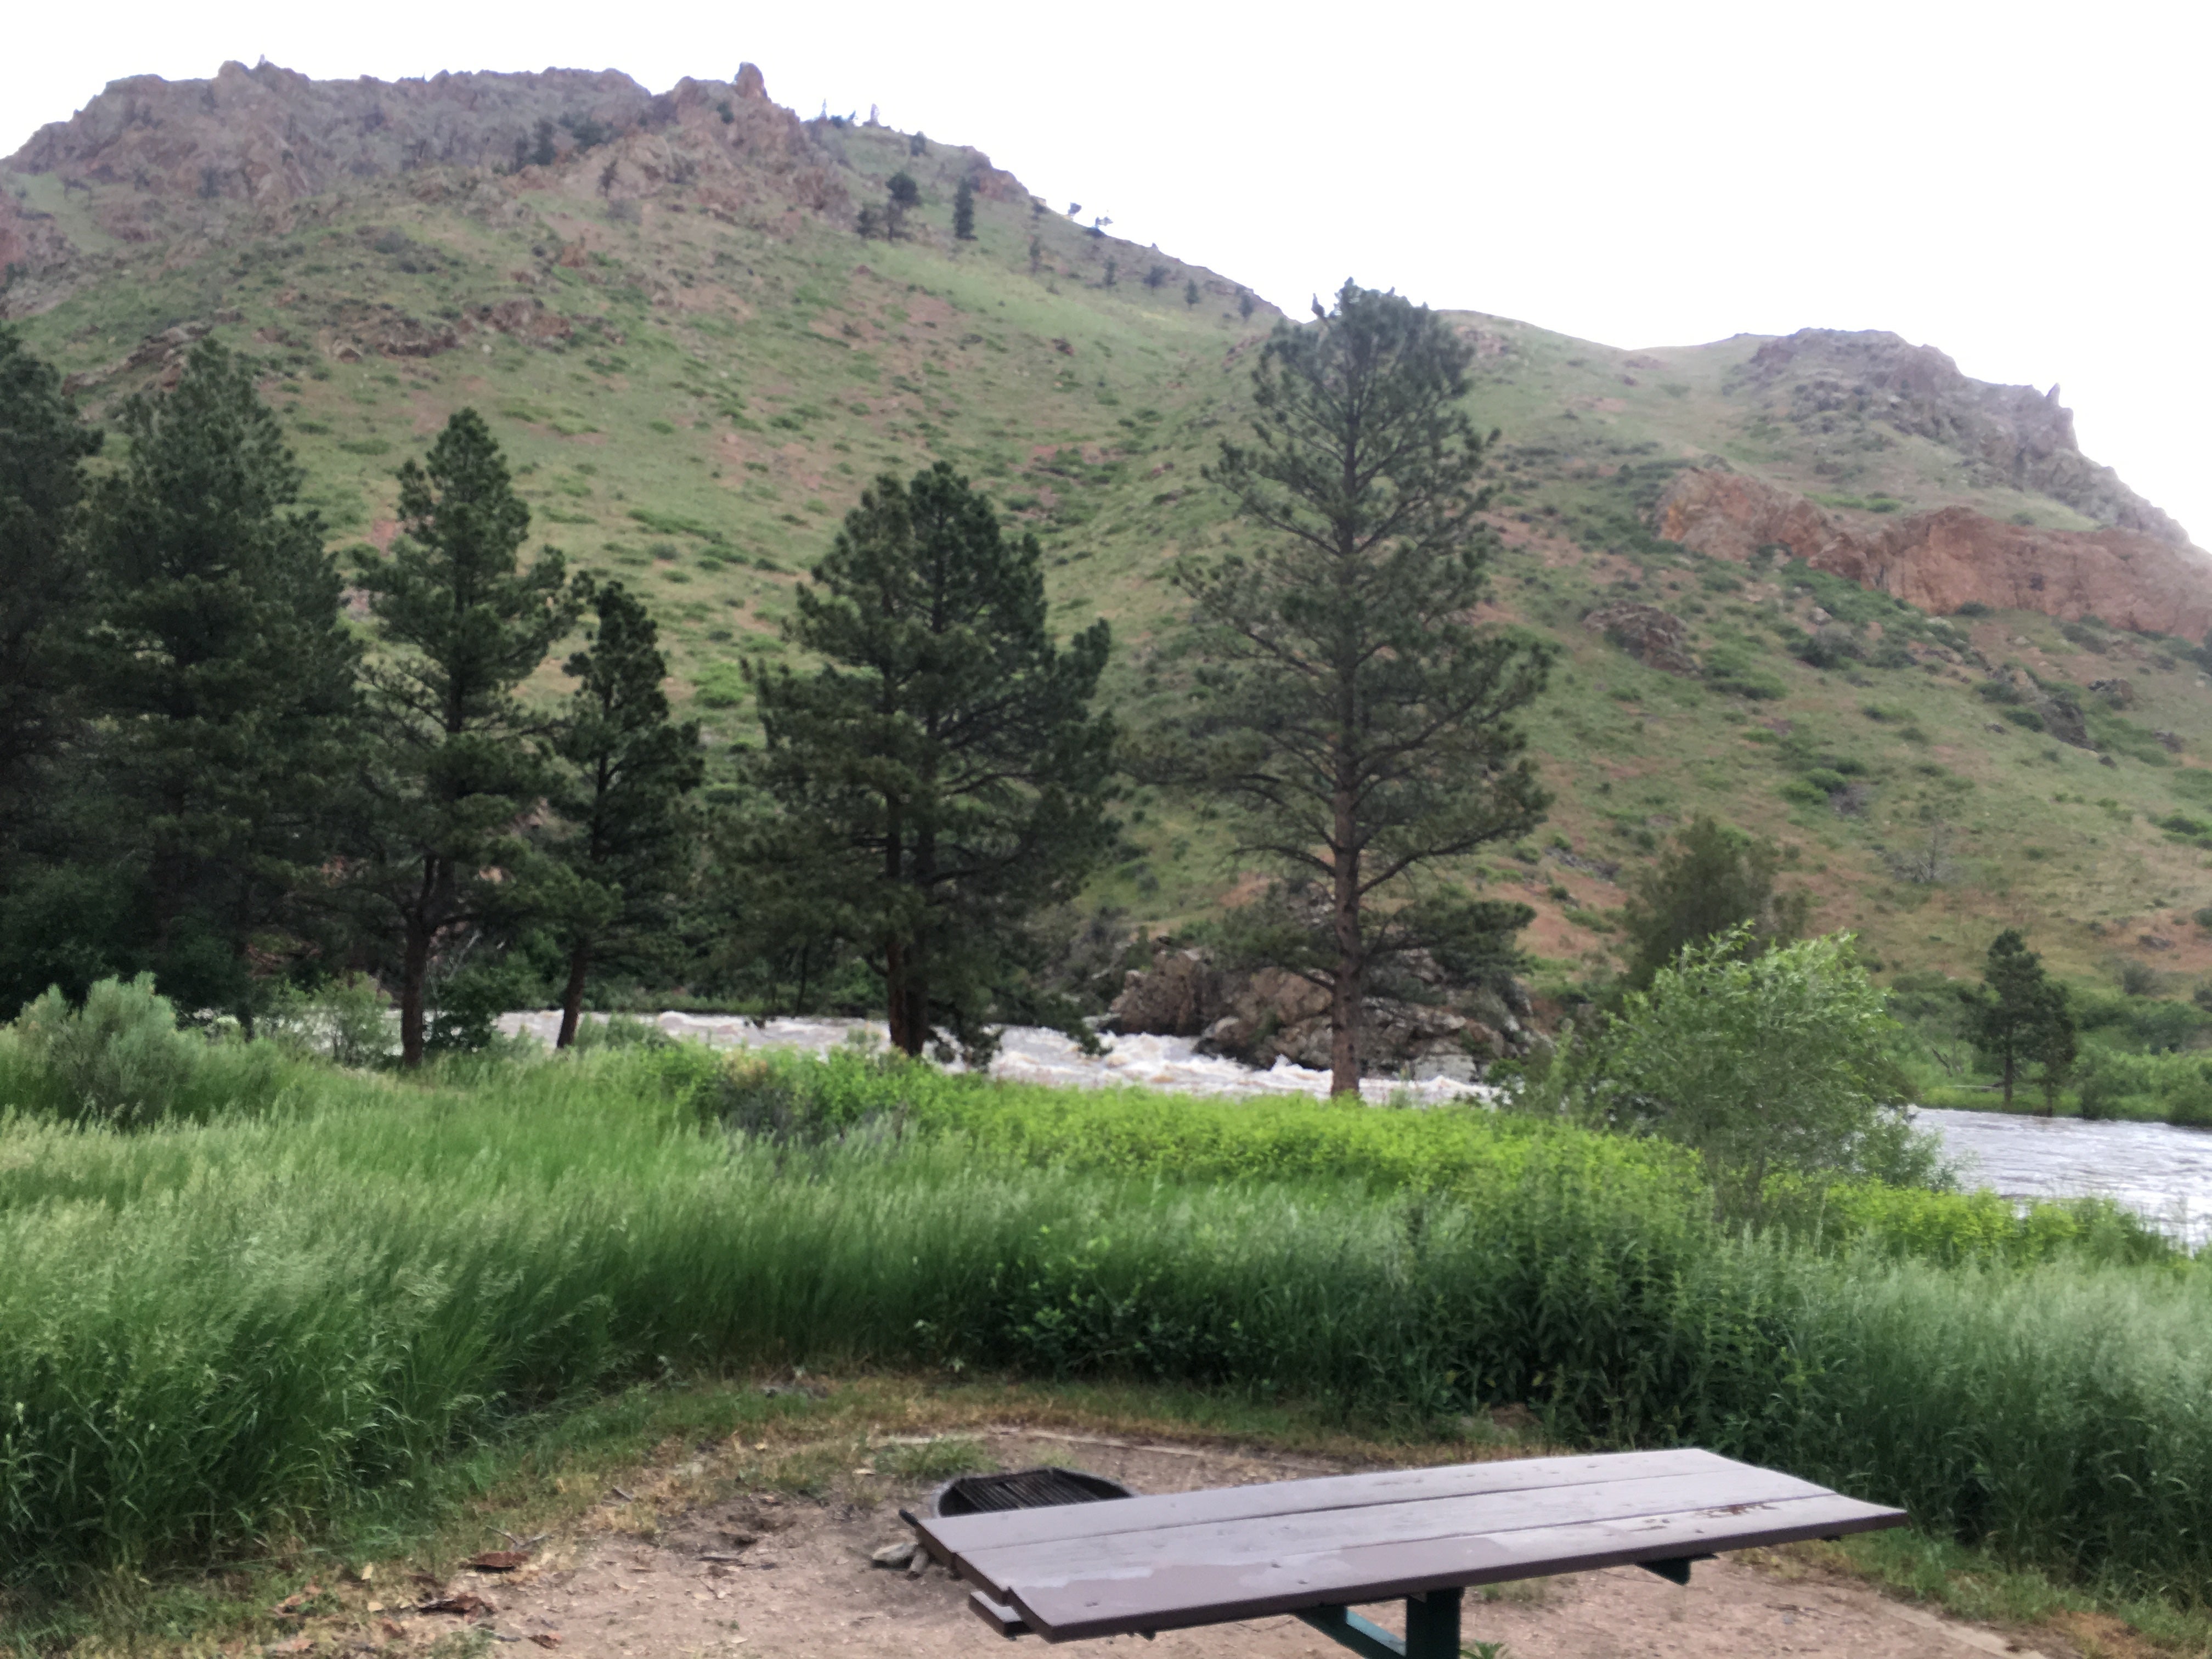 View of the Cache la Poudre river at high water from campsite #1.